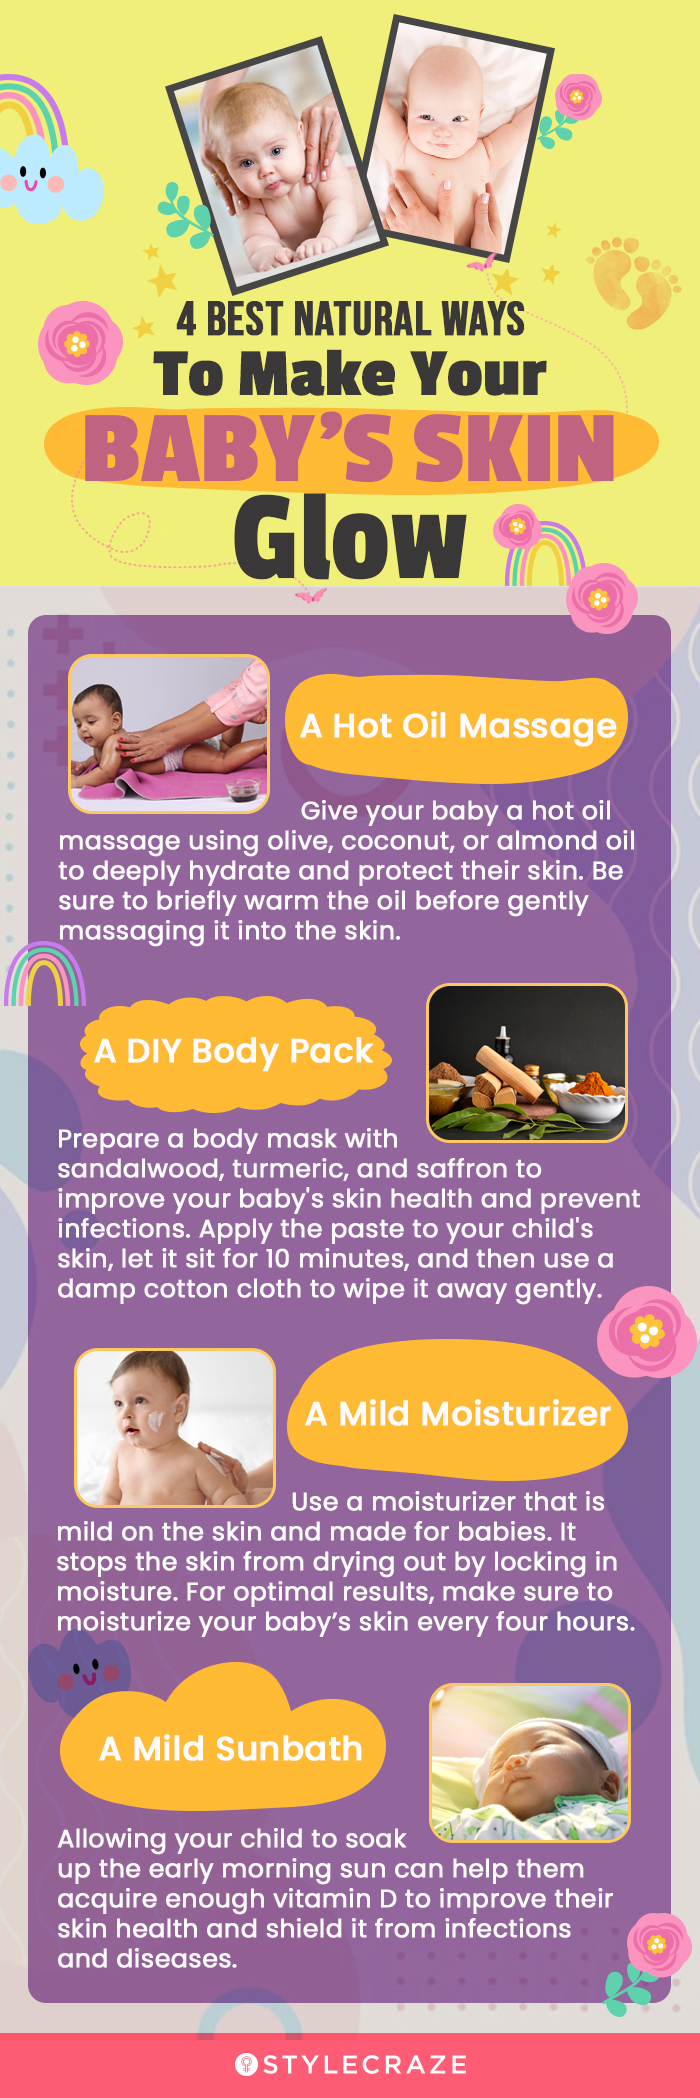 4 best natural ways to make your baby's skin glow (infographic)